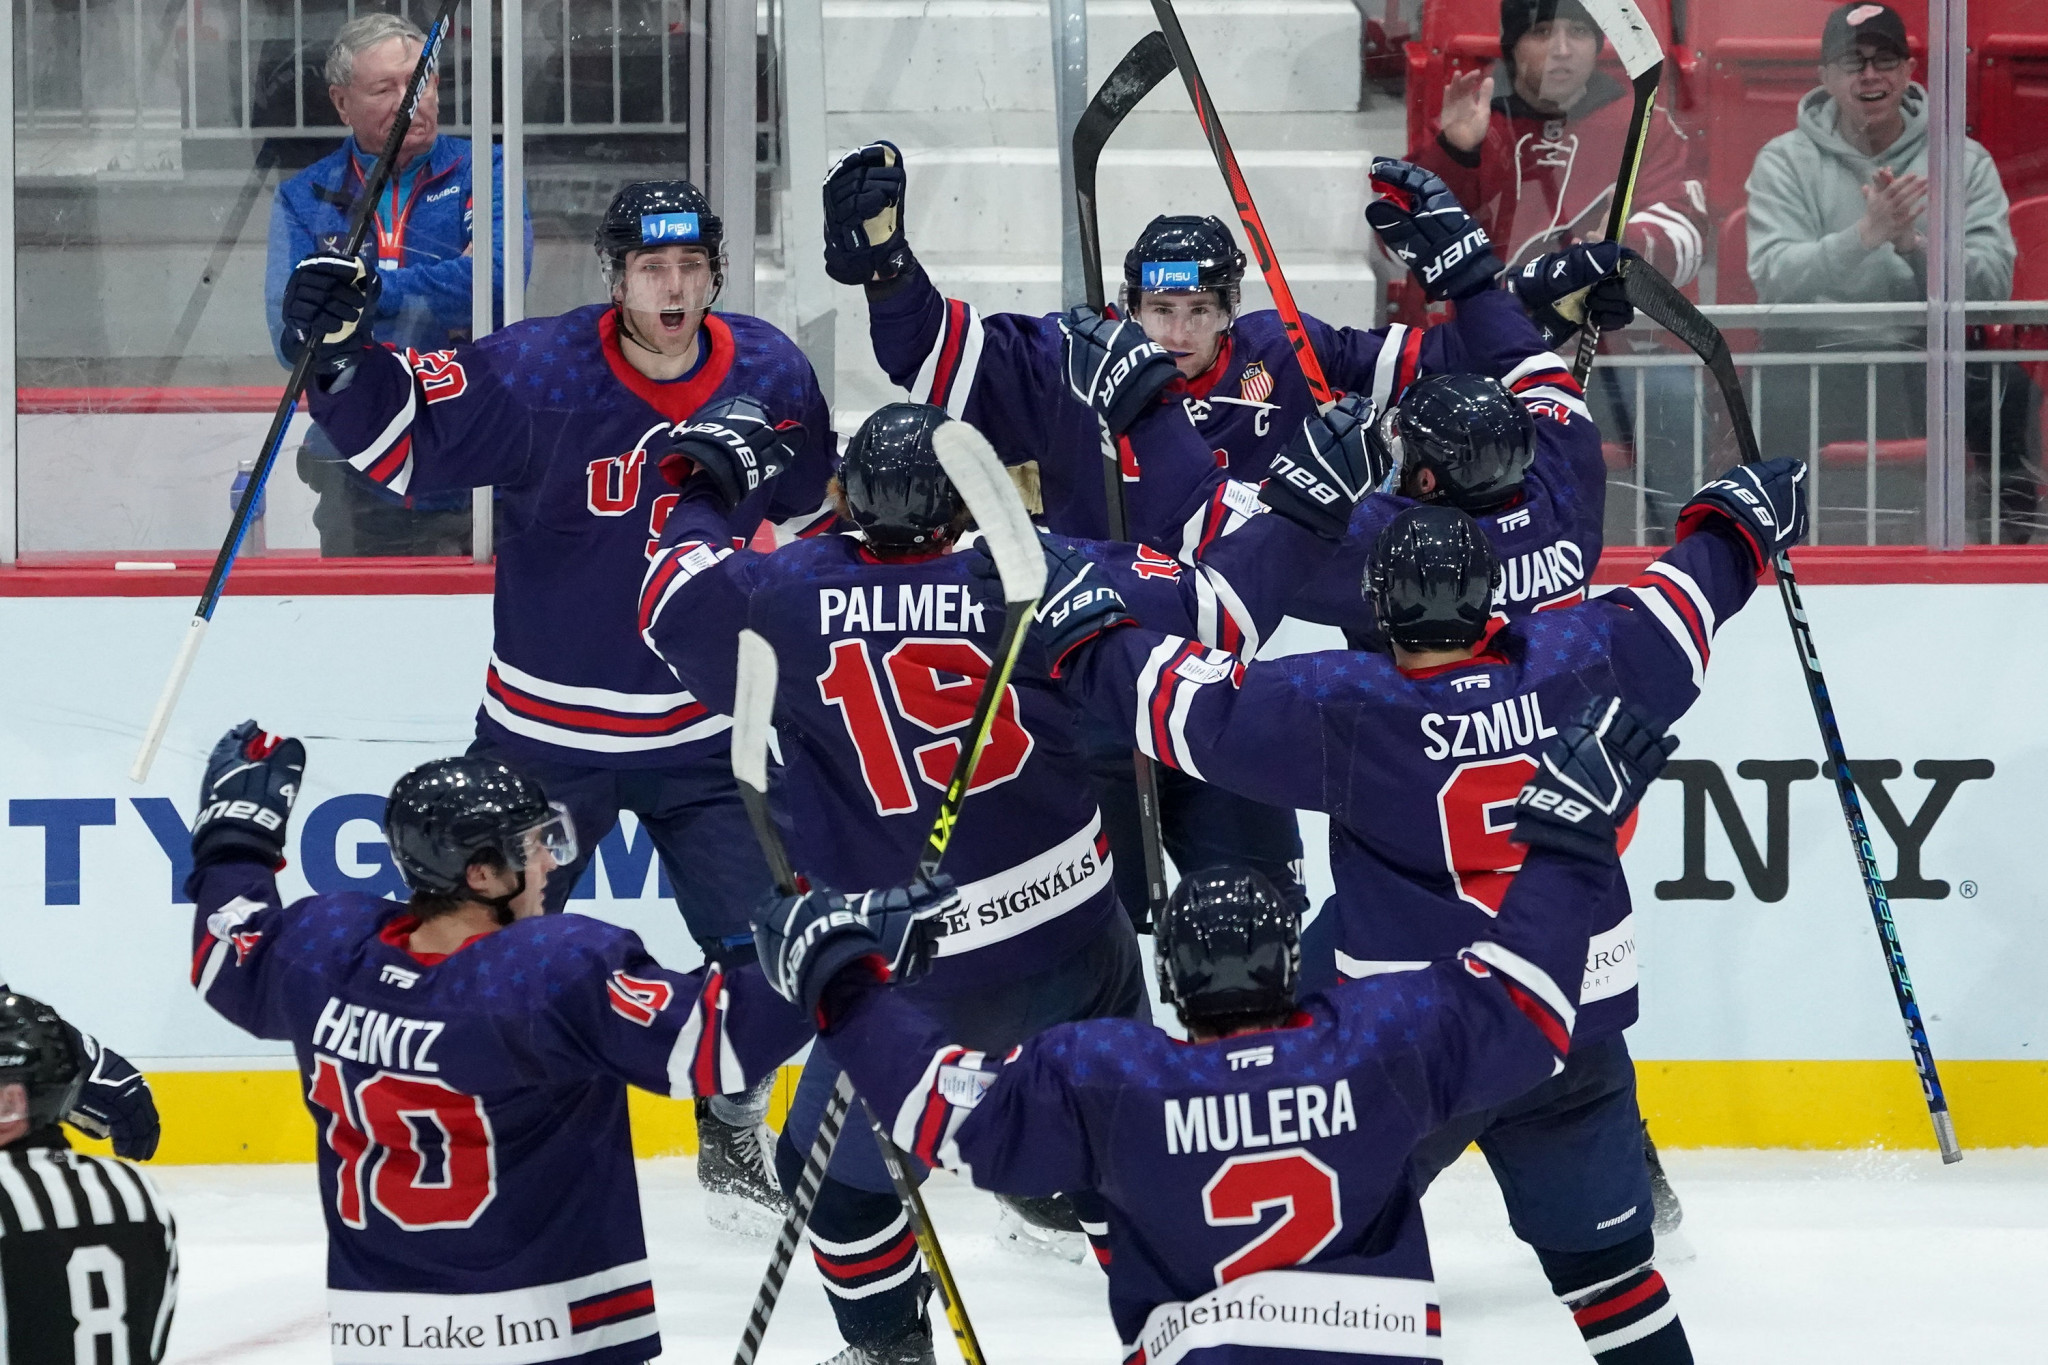 The 4-3 victory meant that the US qualified for the men's final for the first time ever at the Winter World University Games ©FISU